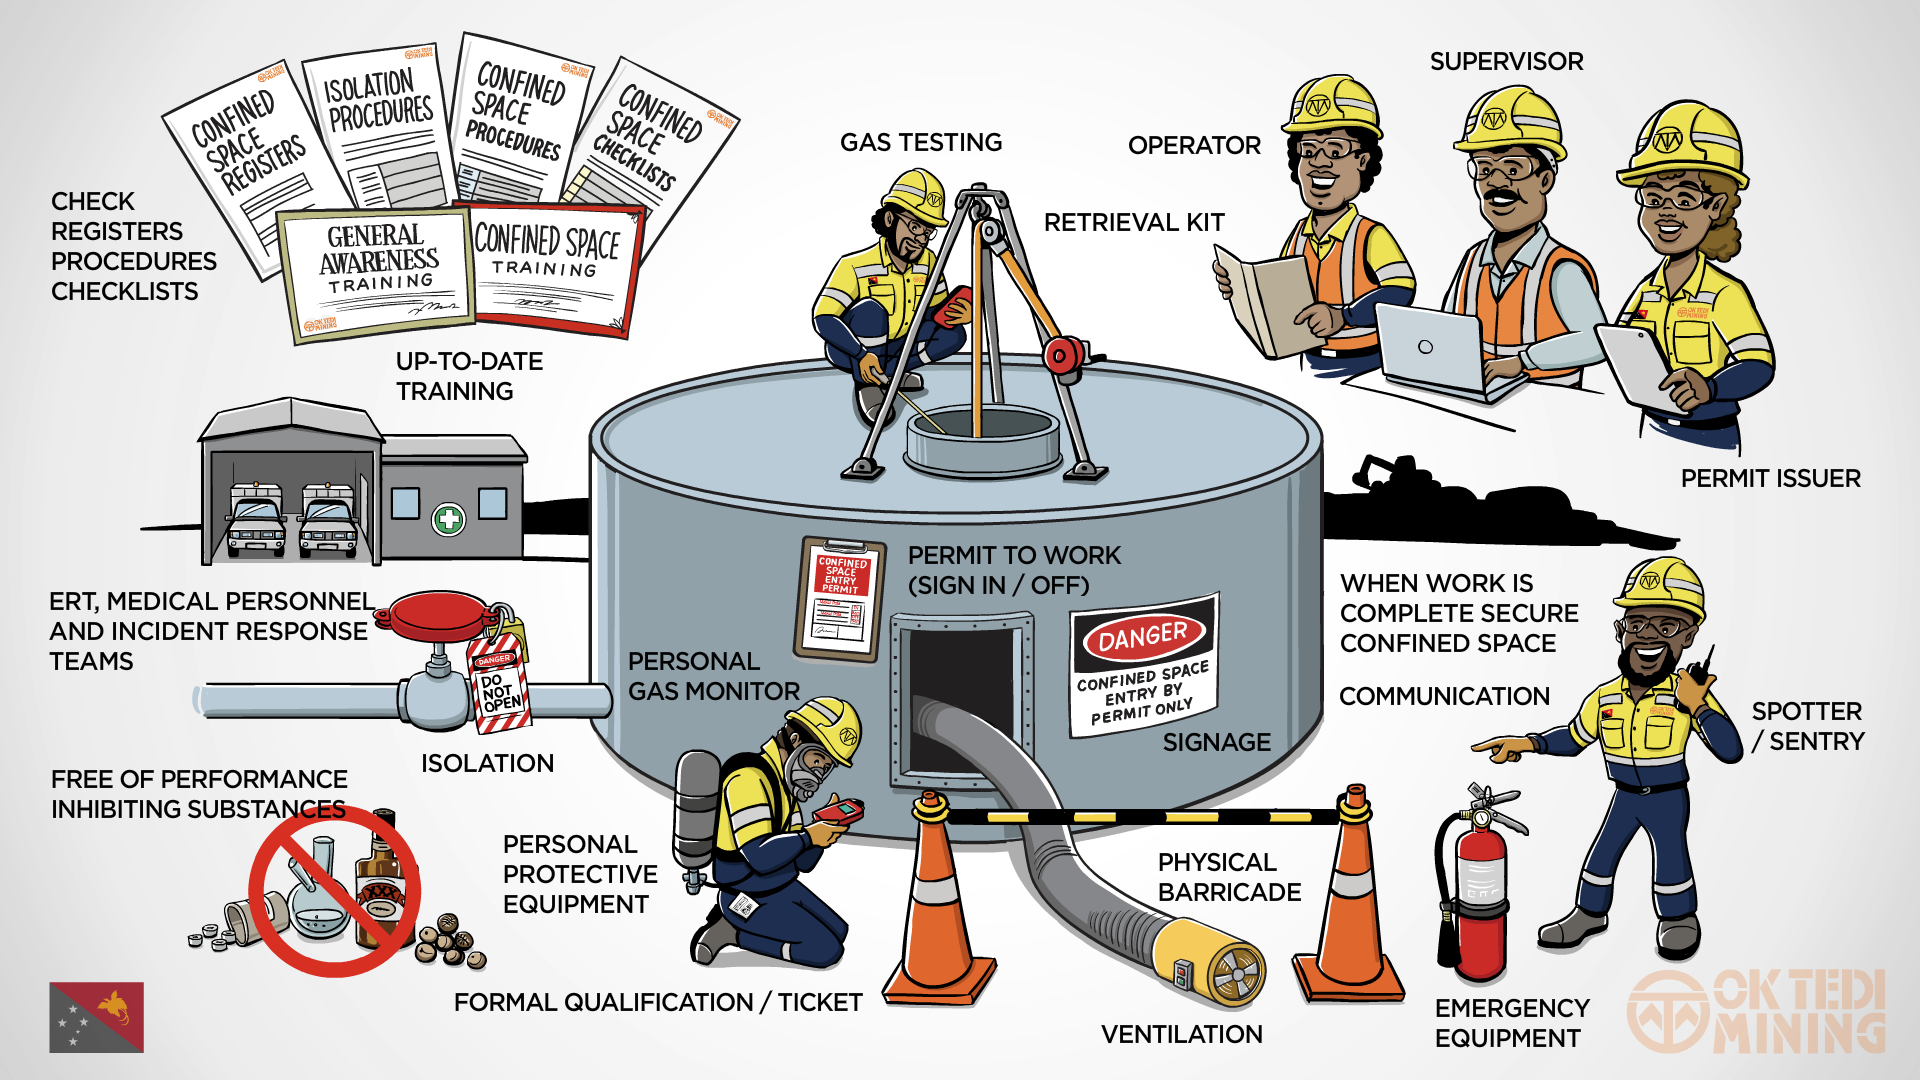 Safety Poster Confined Space Entry Cs999425